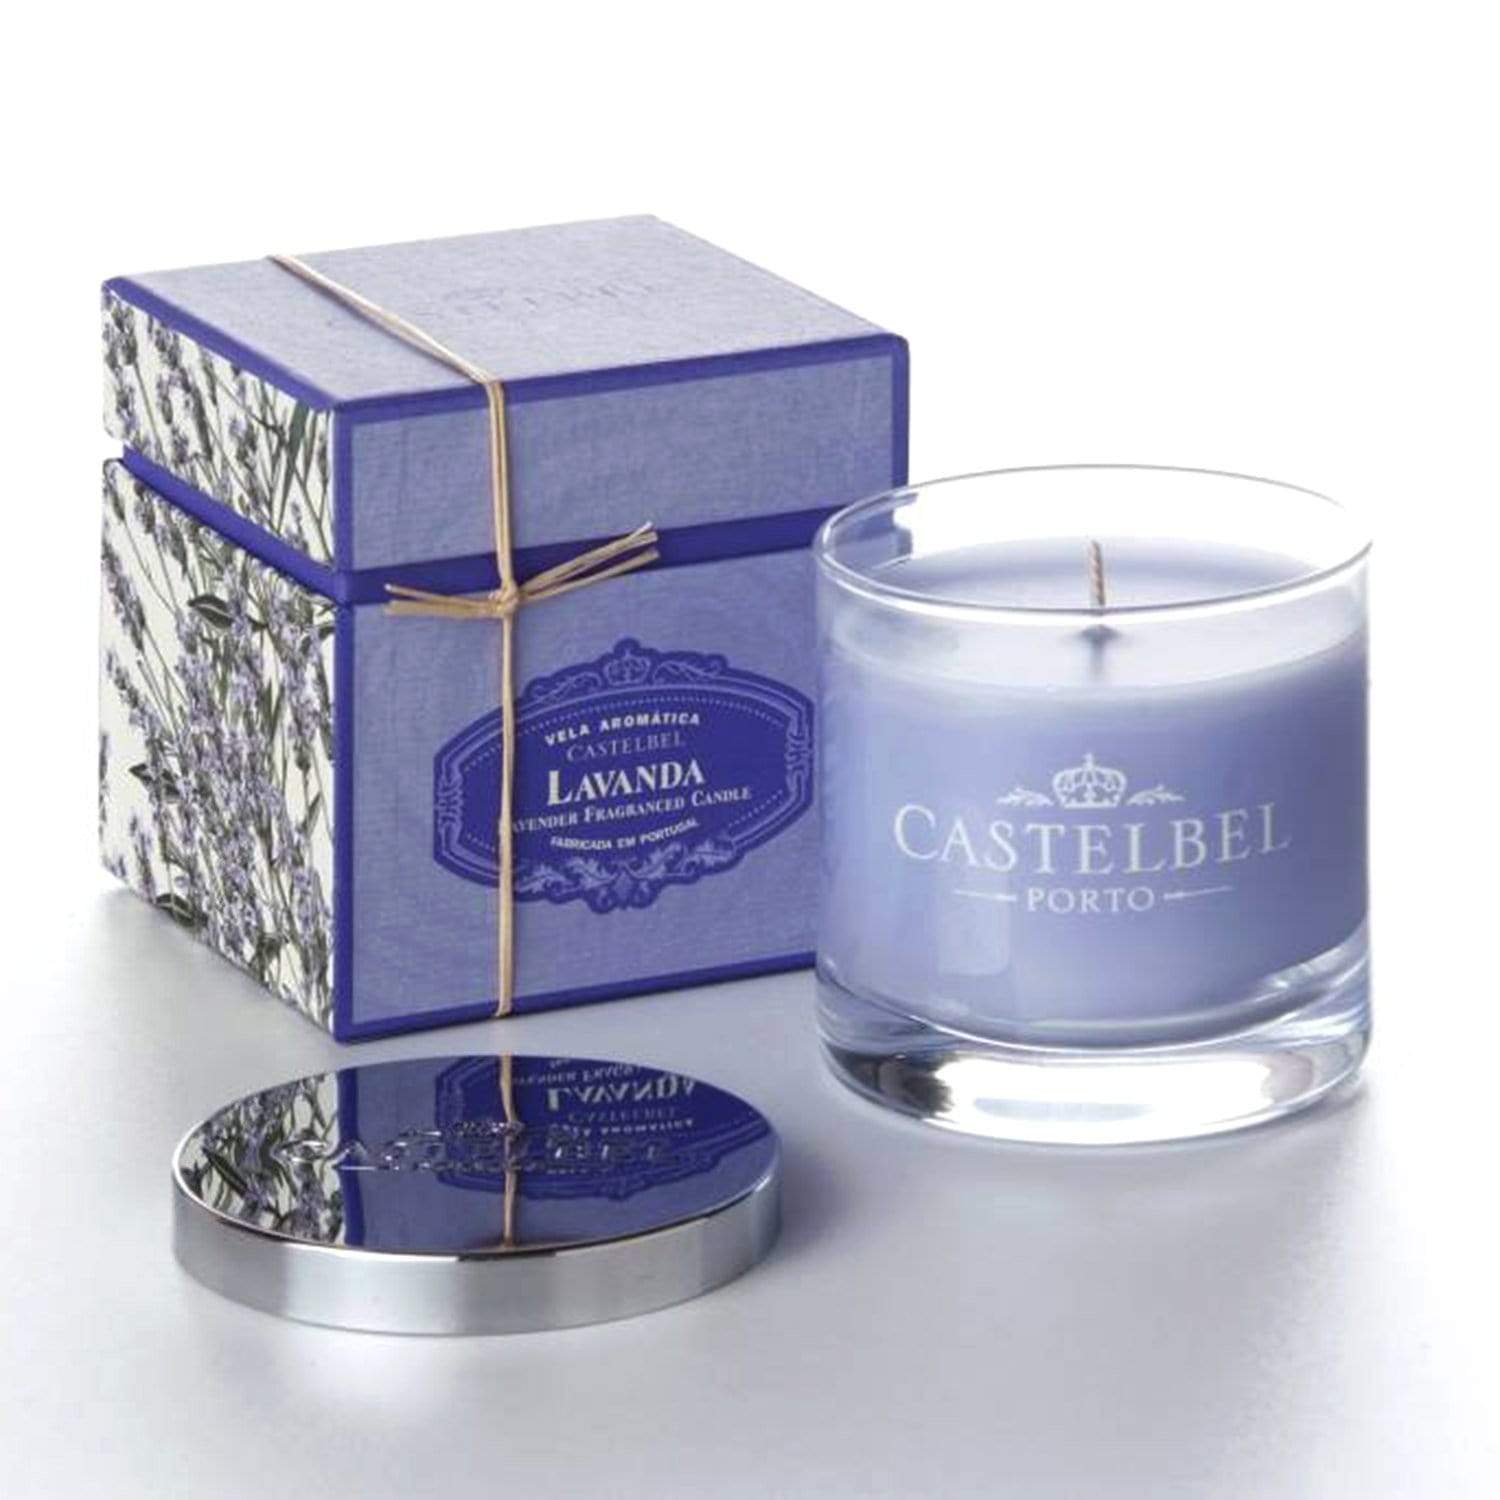 Castelbel Ambiance Lavender Scented Candle - C1-0701 - Jashanmal Home